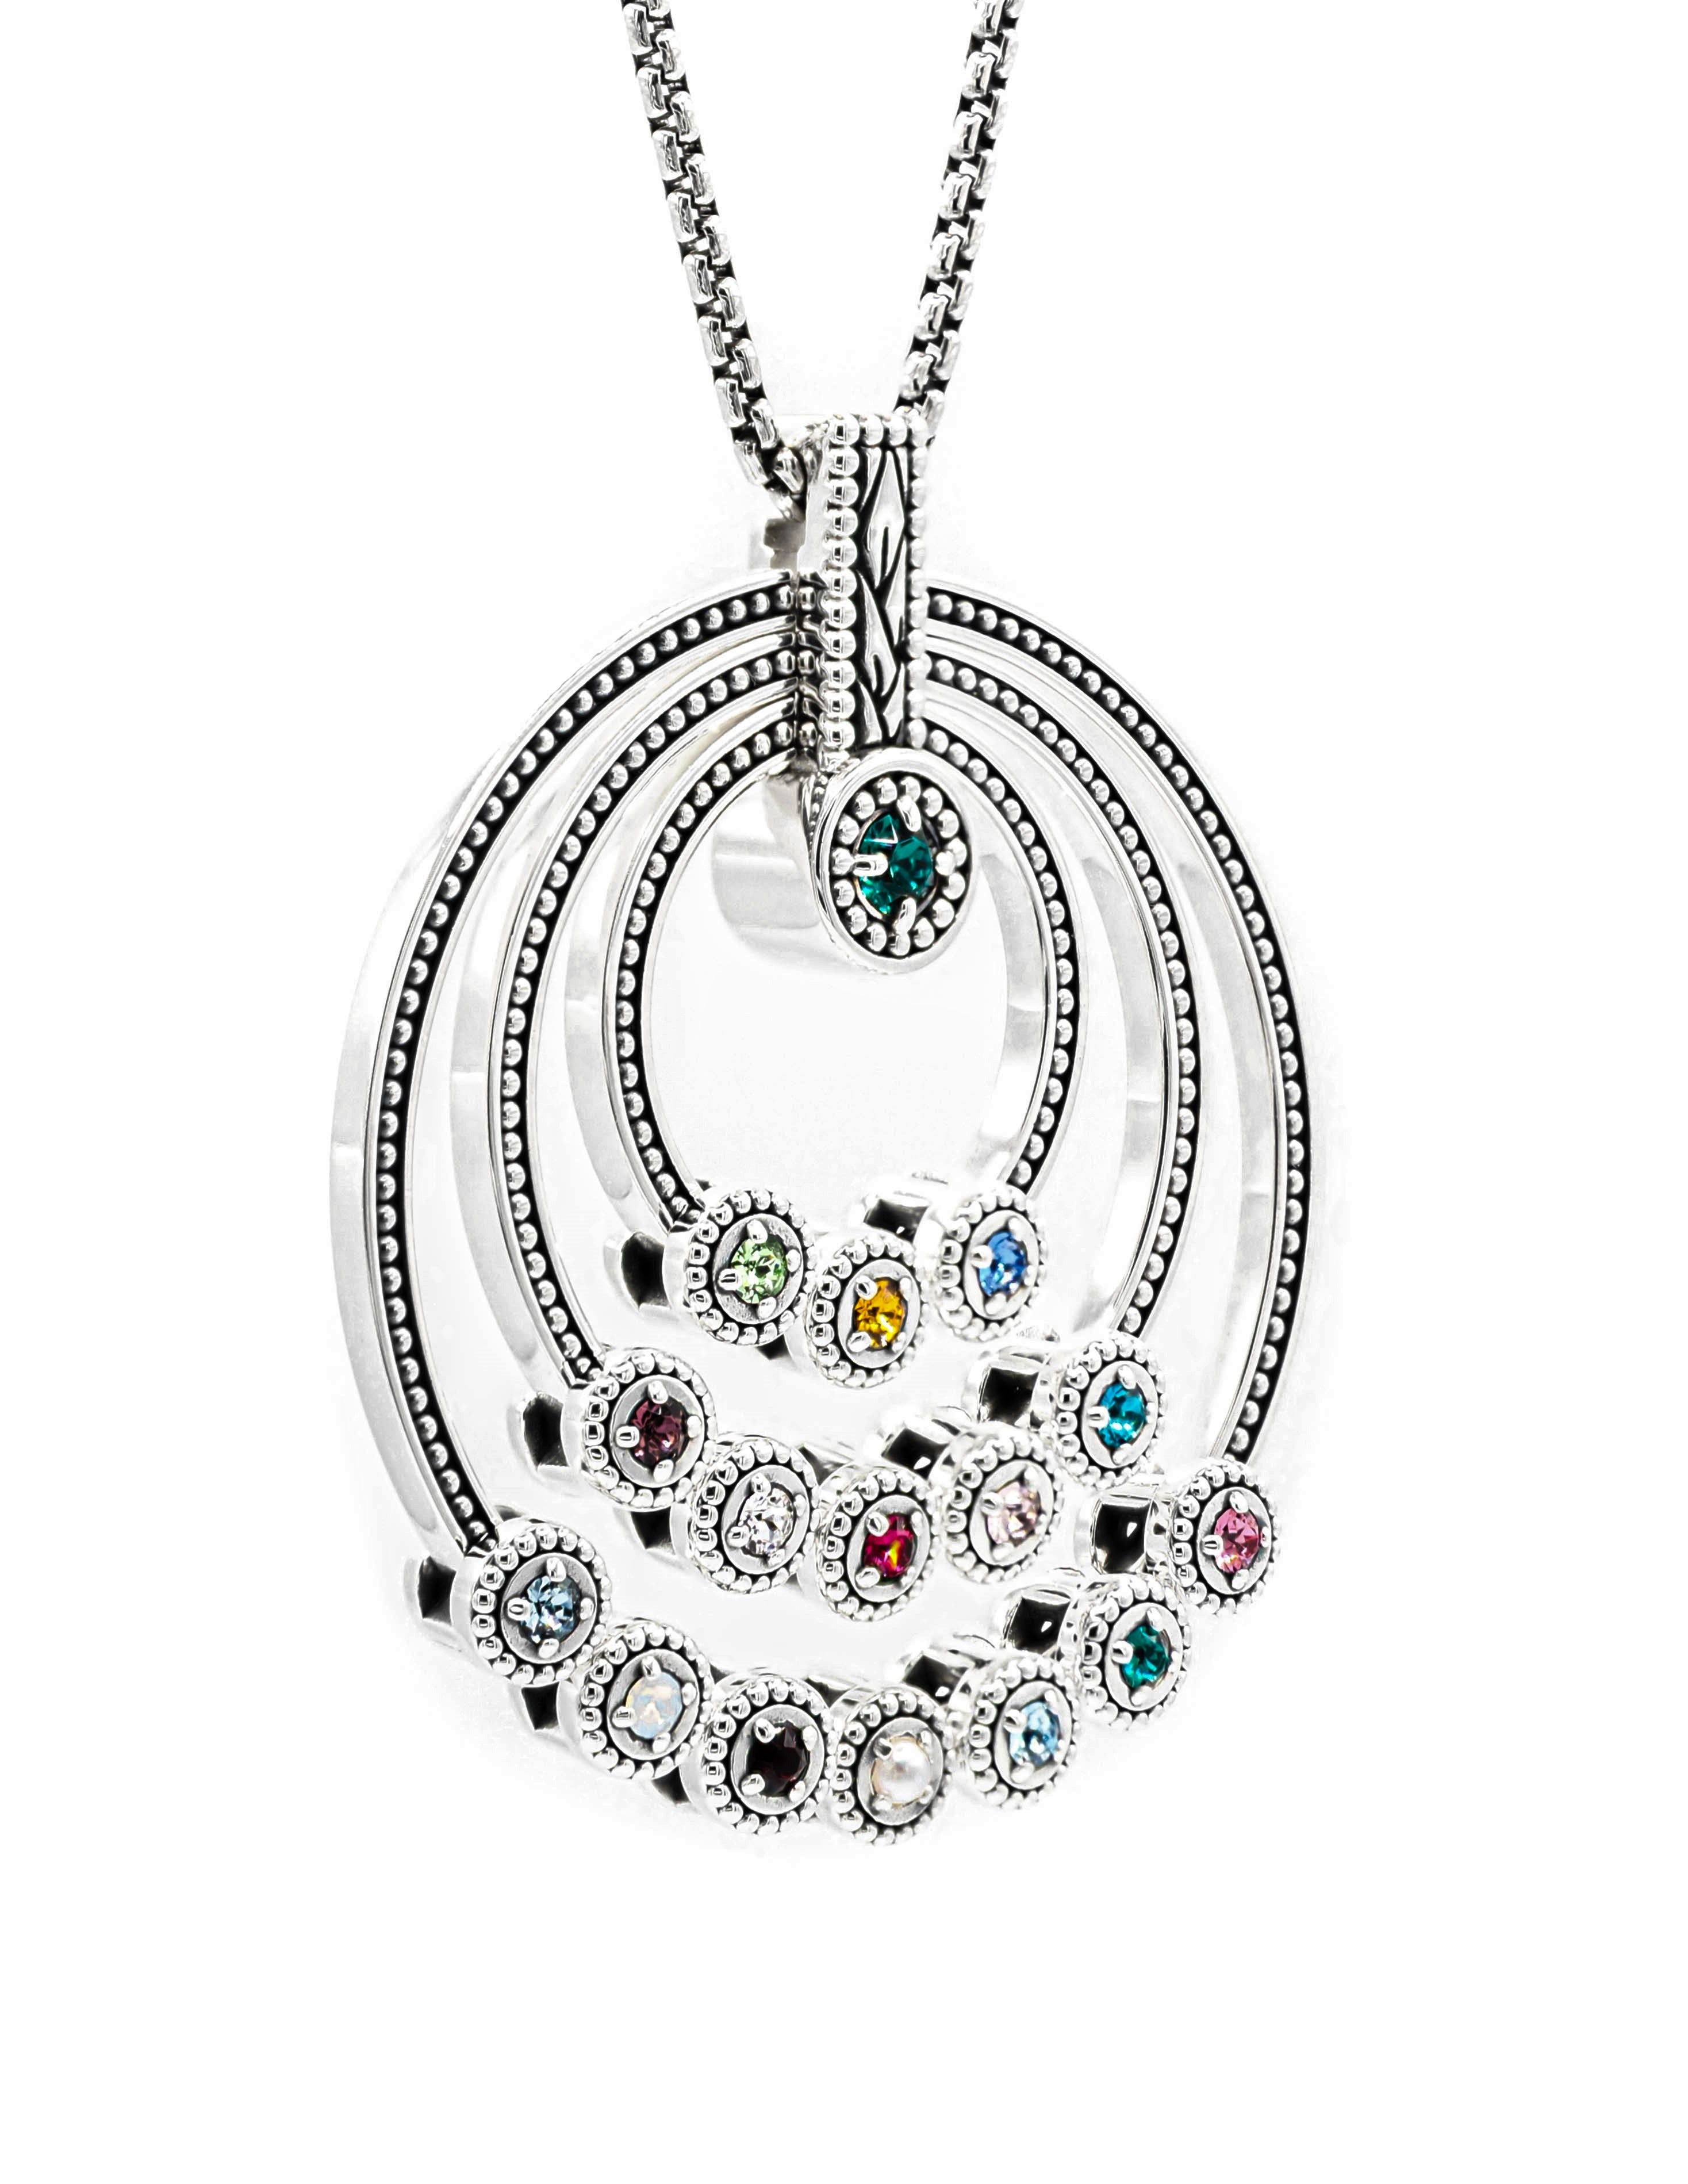 16 Customized Grandma Necklaces with Birthstones - Airfrov